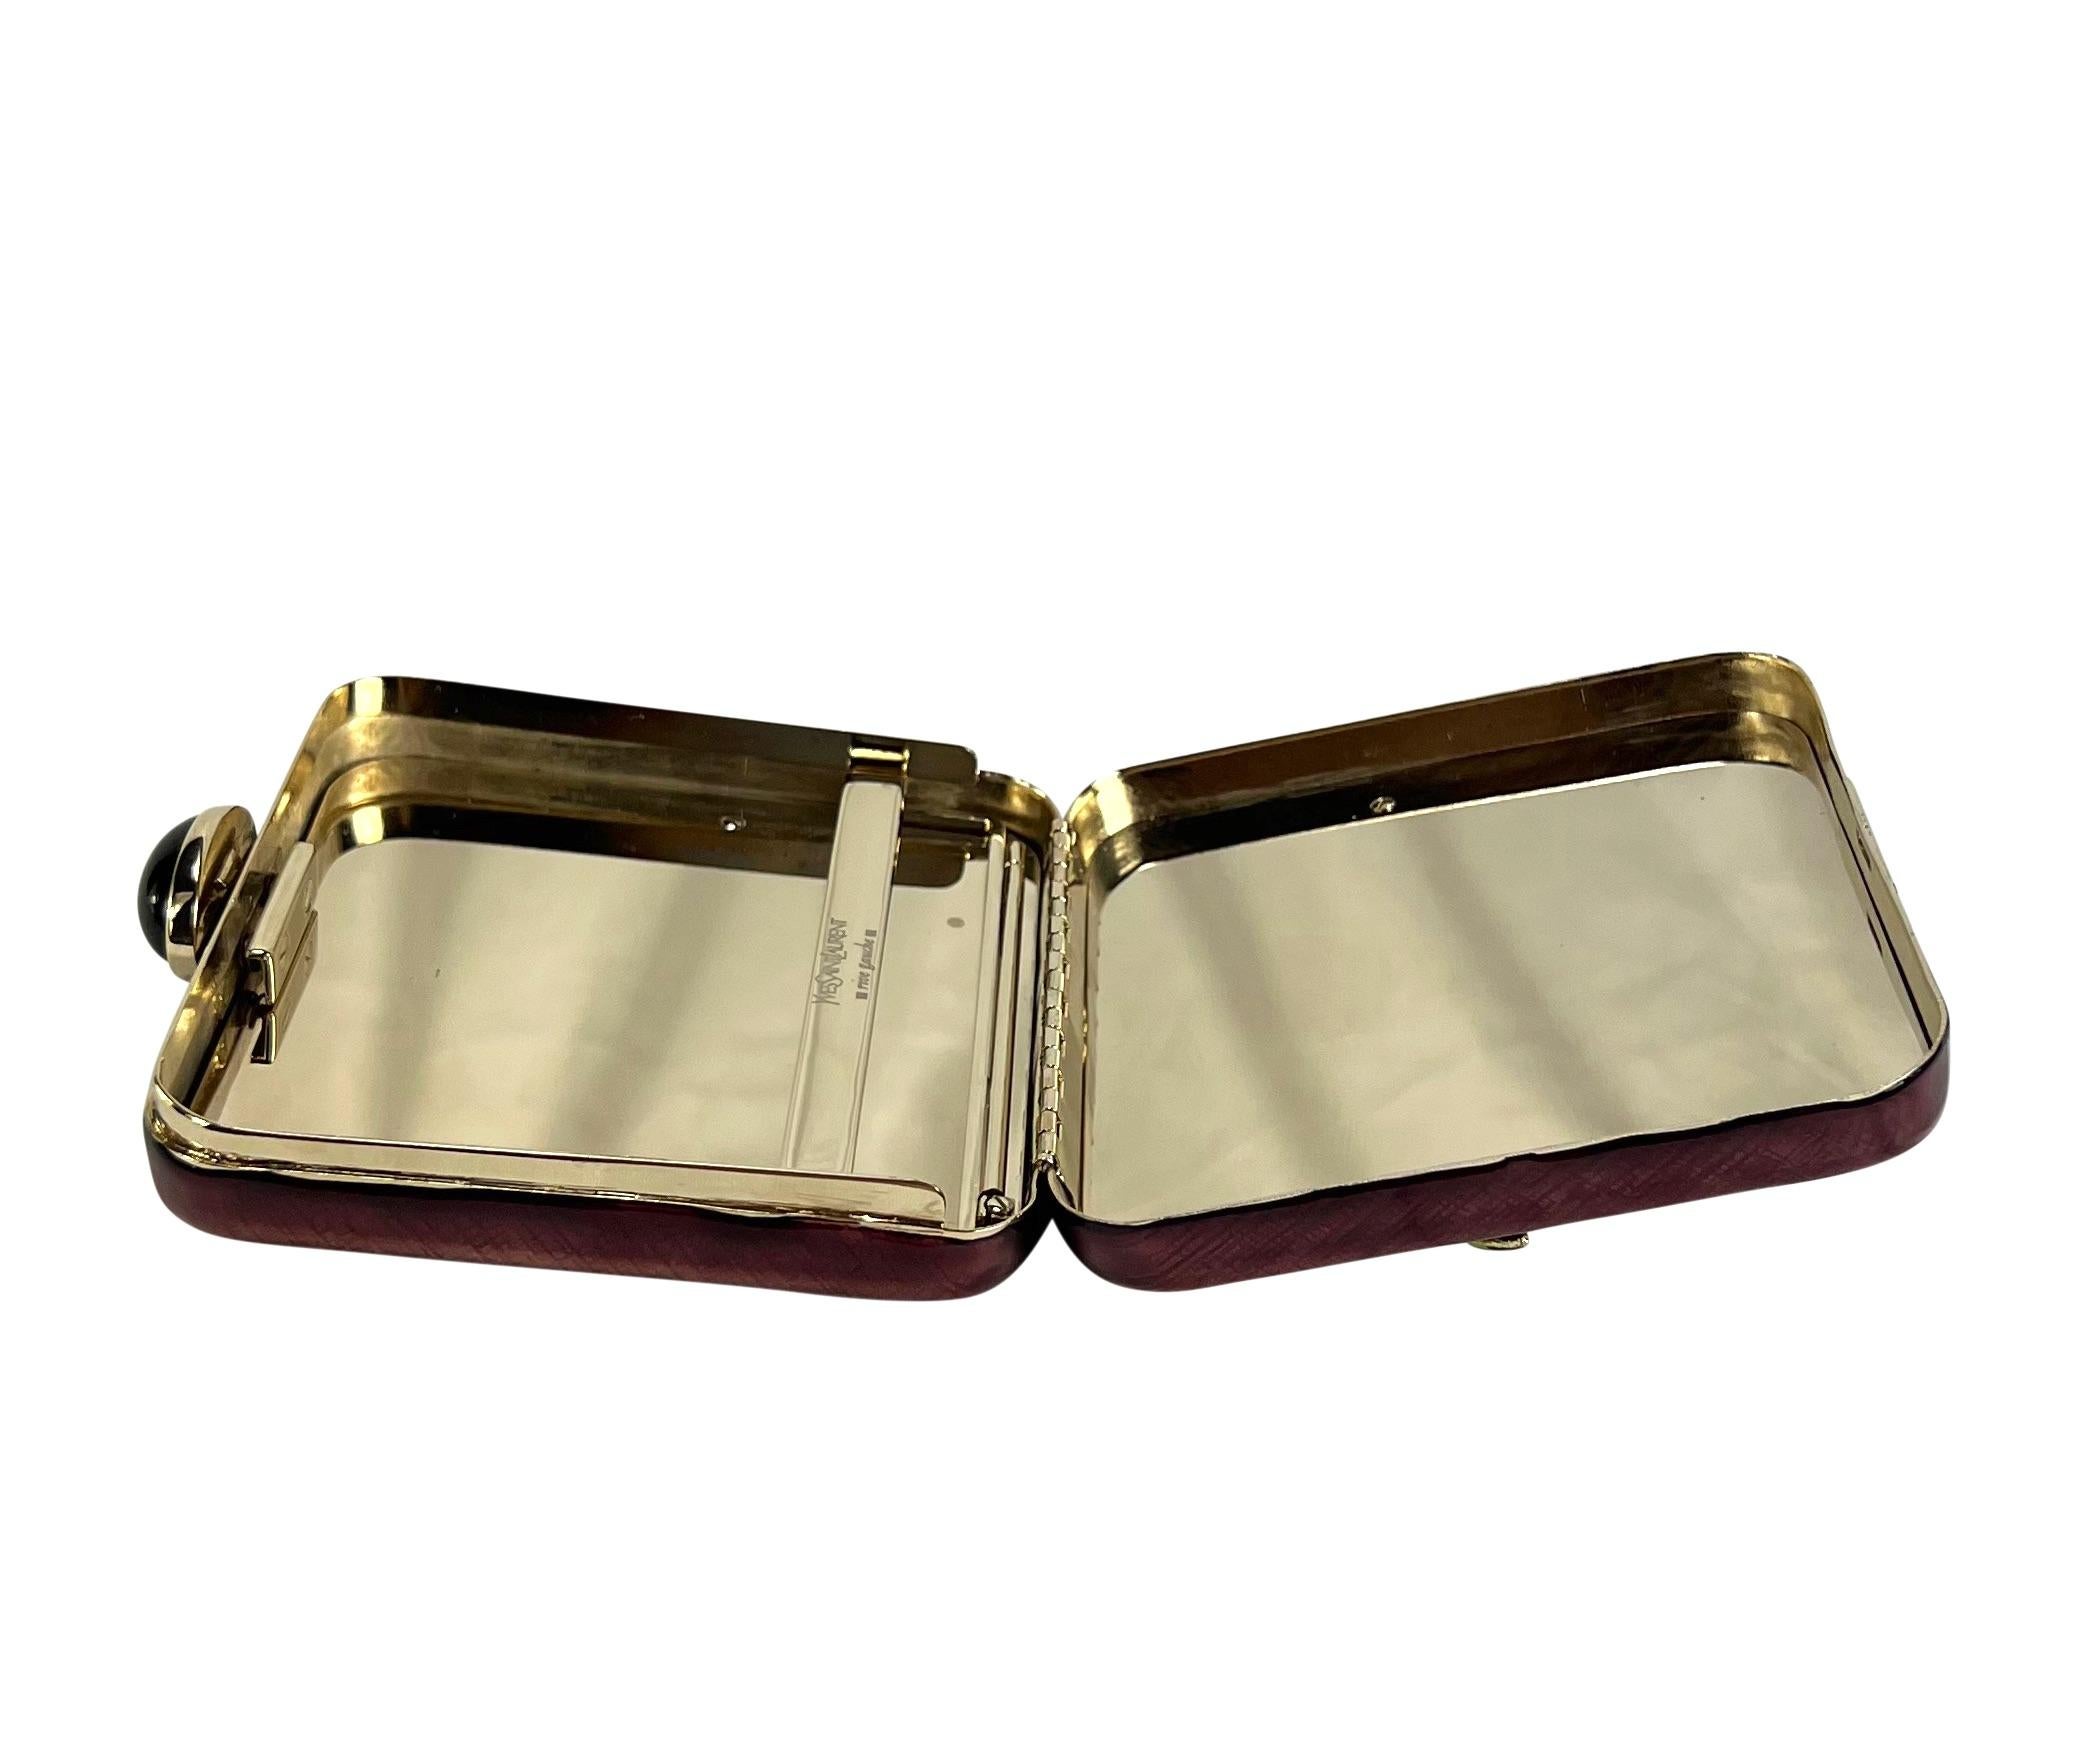 S/S 2004 Yves Saint Laurent by Tom Ford Enamel Floral Rhinestone Mini Clutch In Good Condition For Sale In West Hollywood, CA